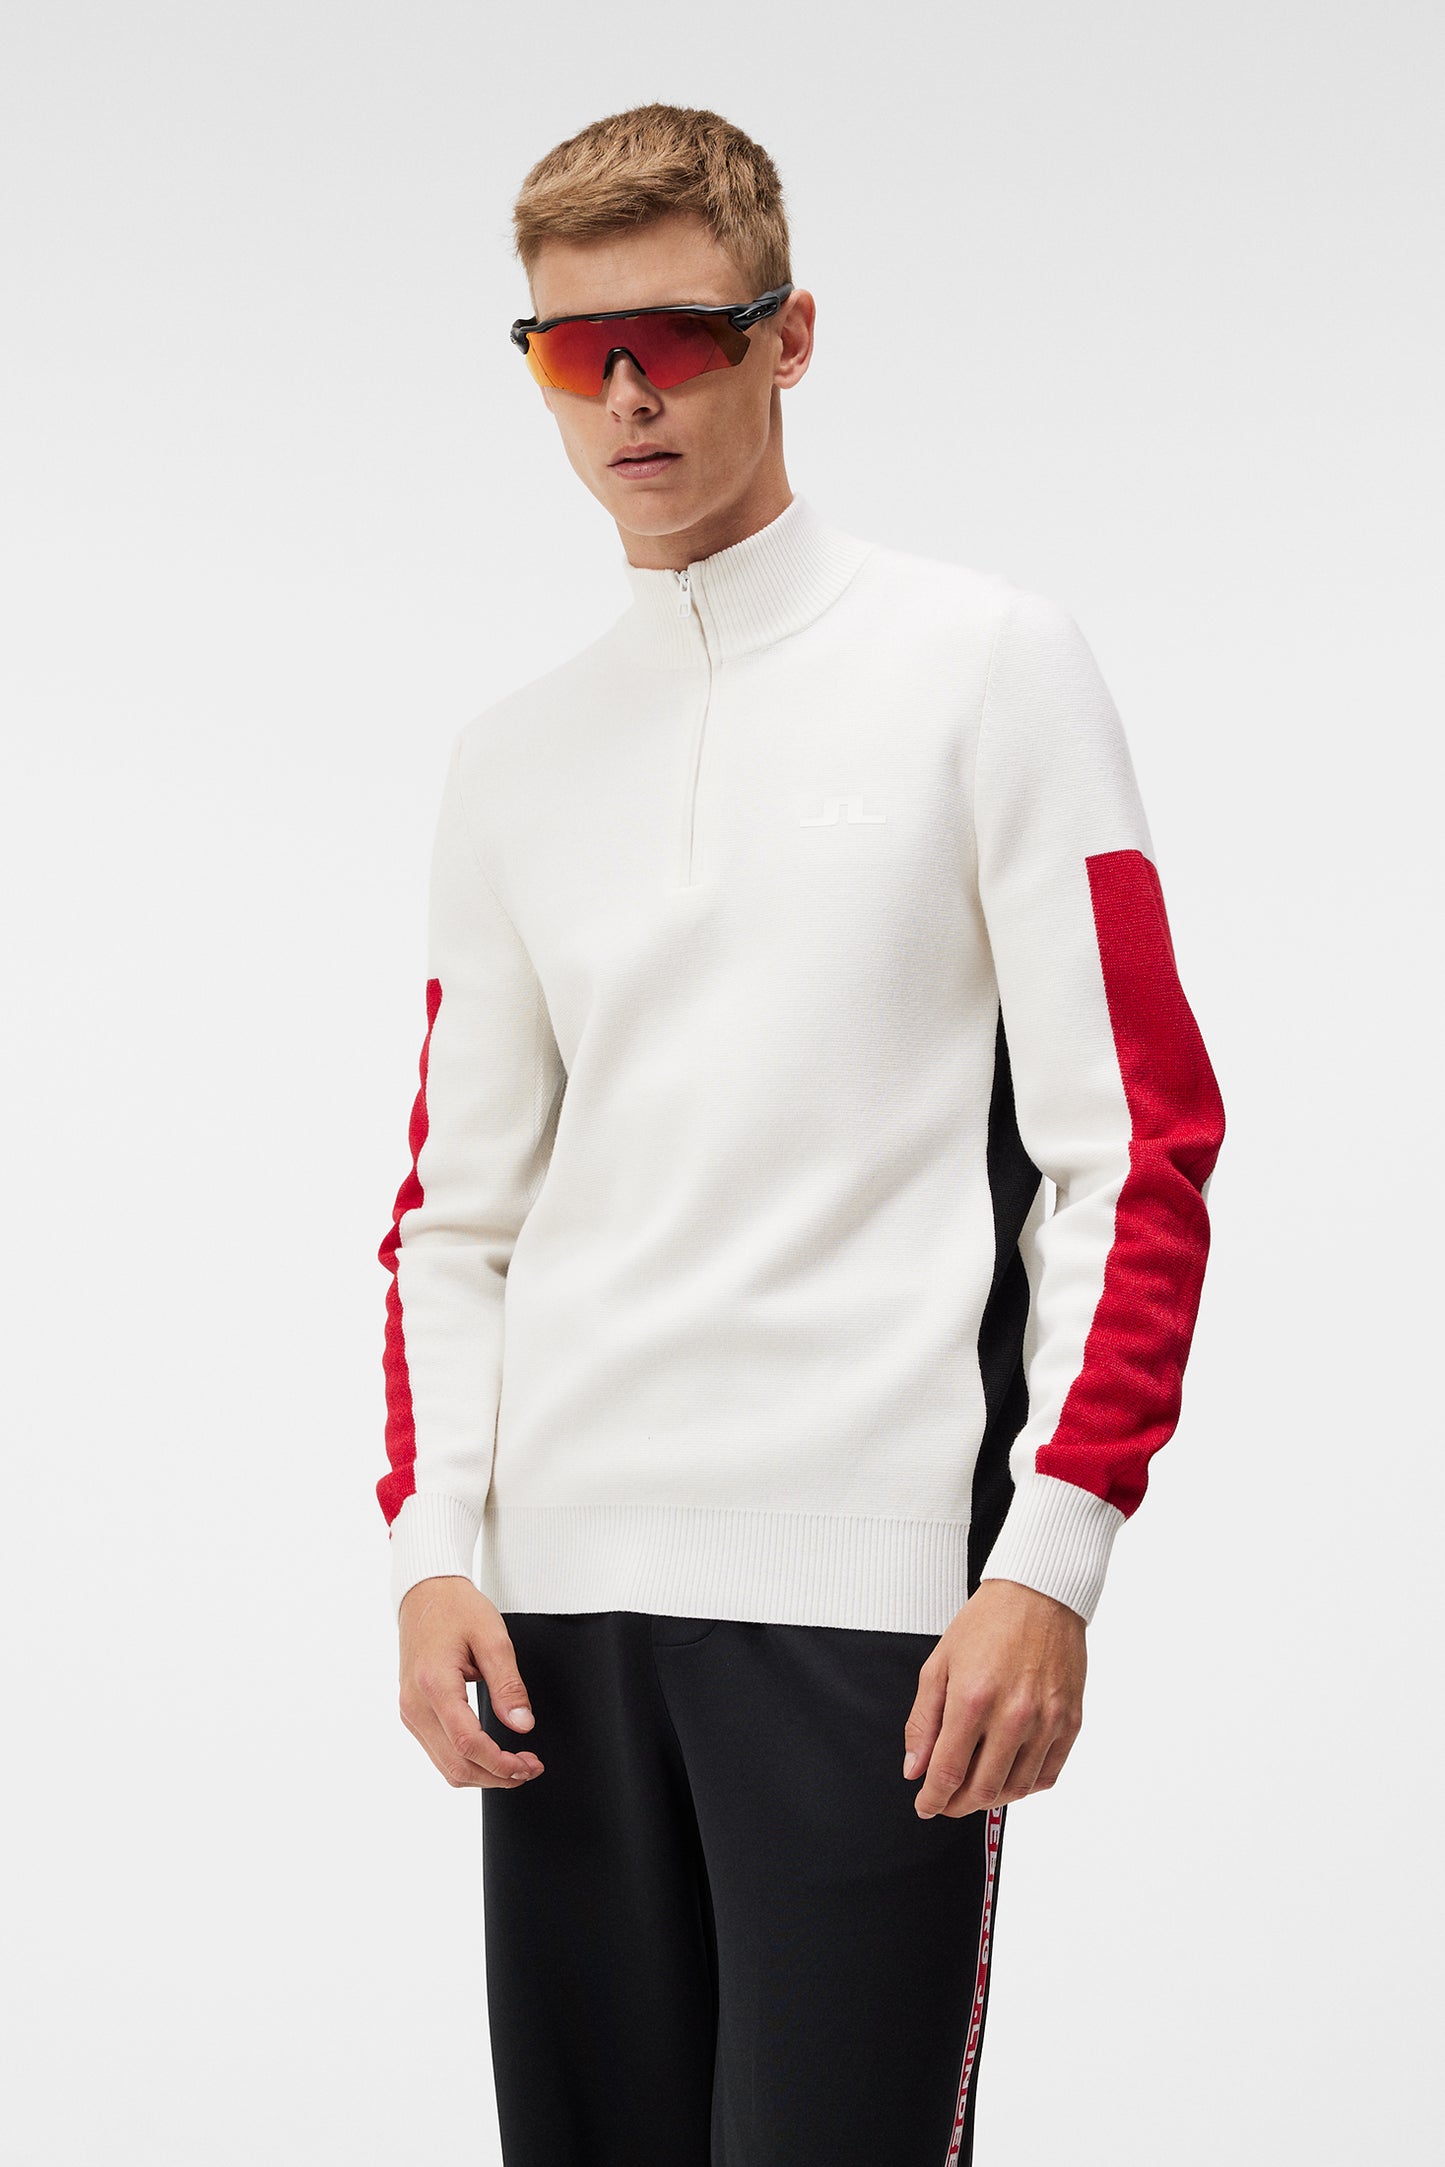 Clide Knitted Sweater / White – J.Lindeberg